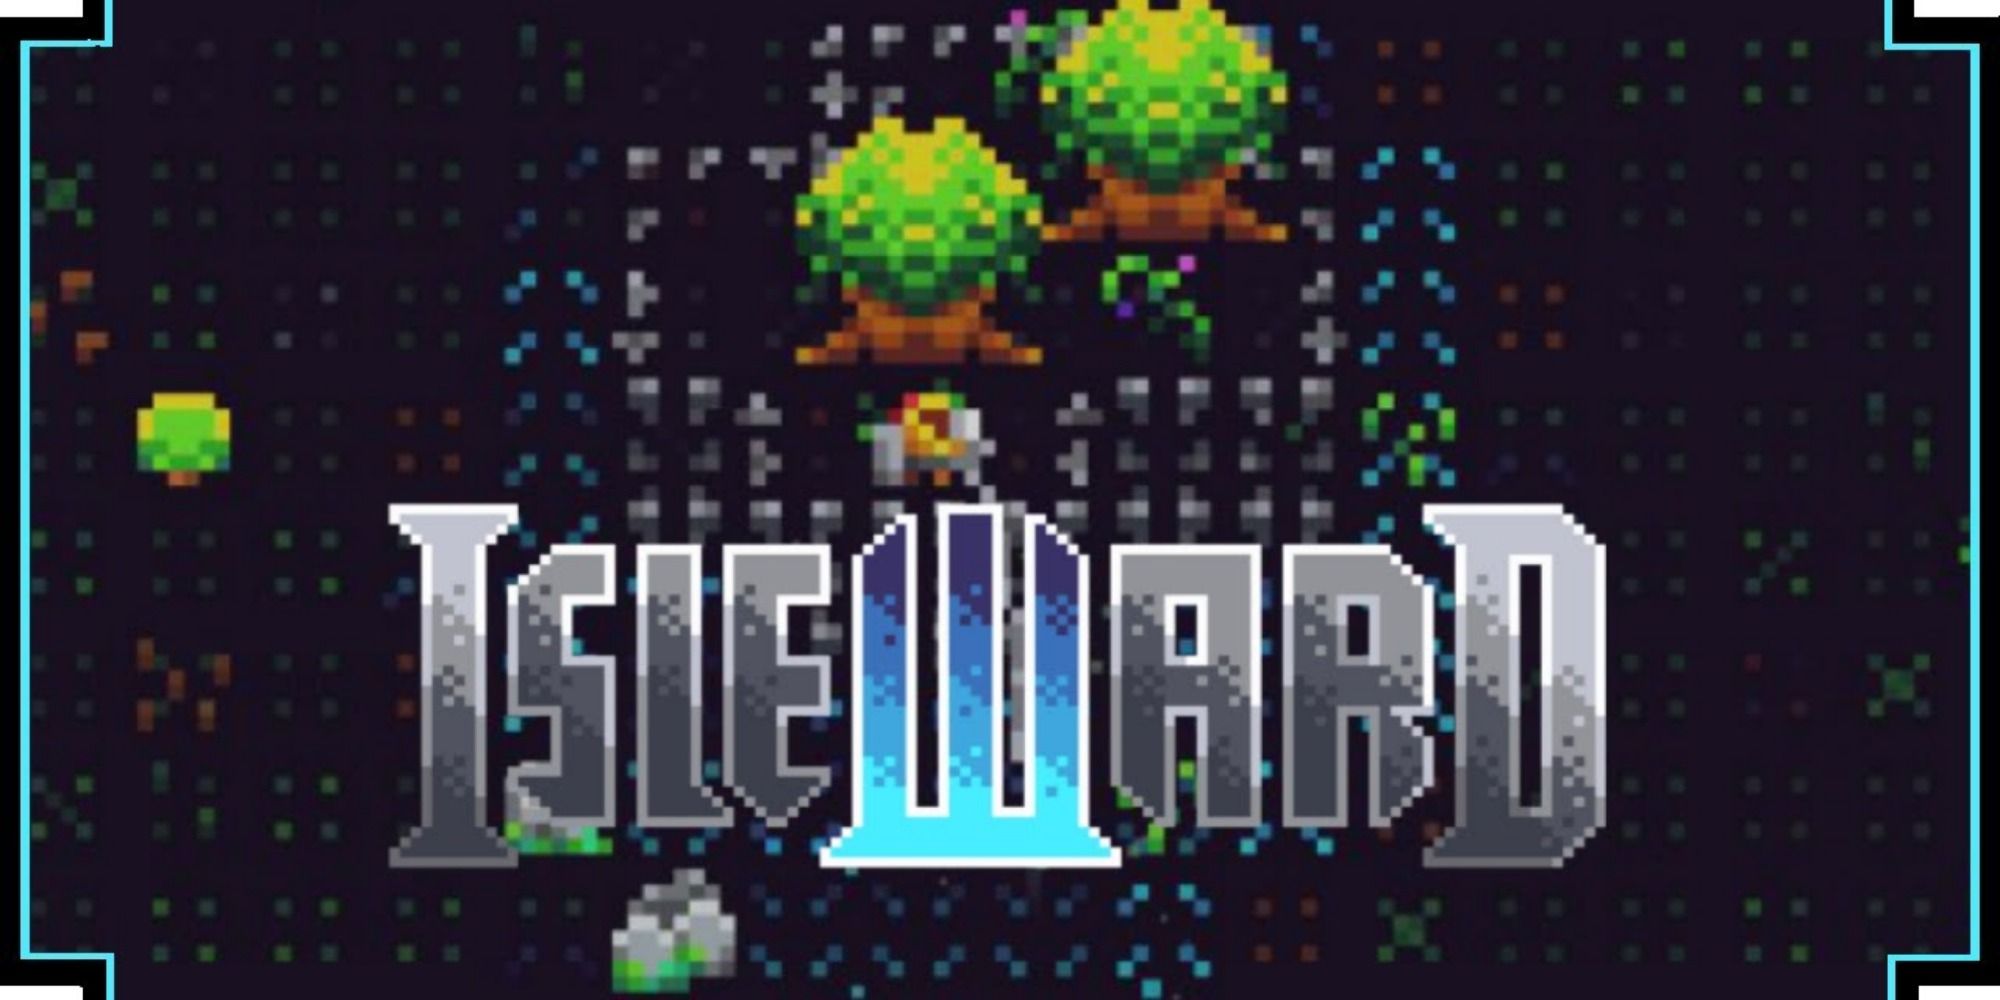 Isleward title art in front of a pixel forest background